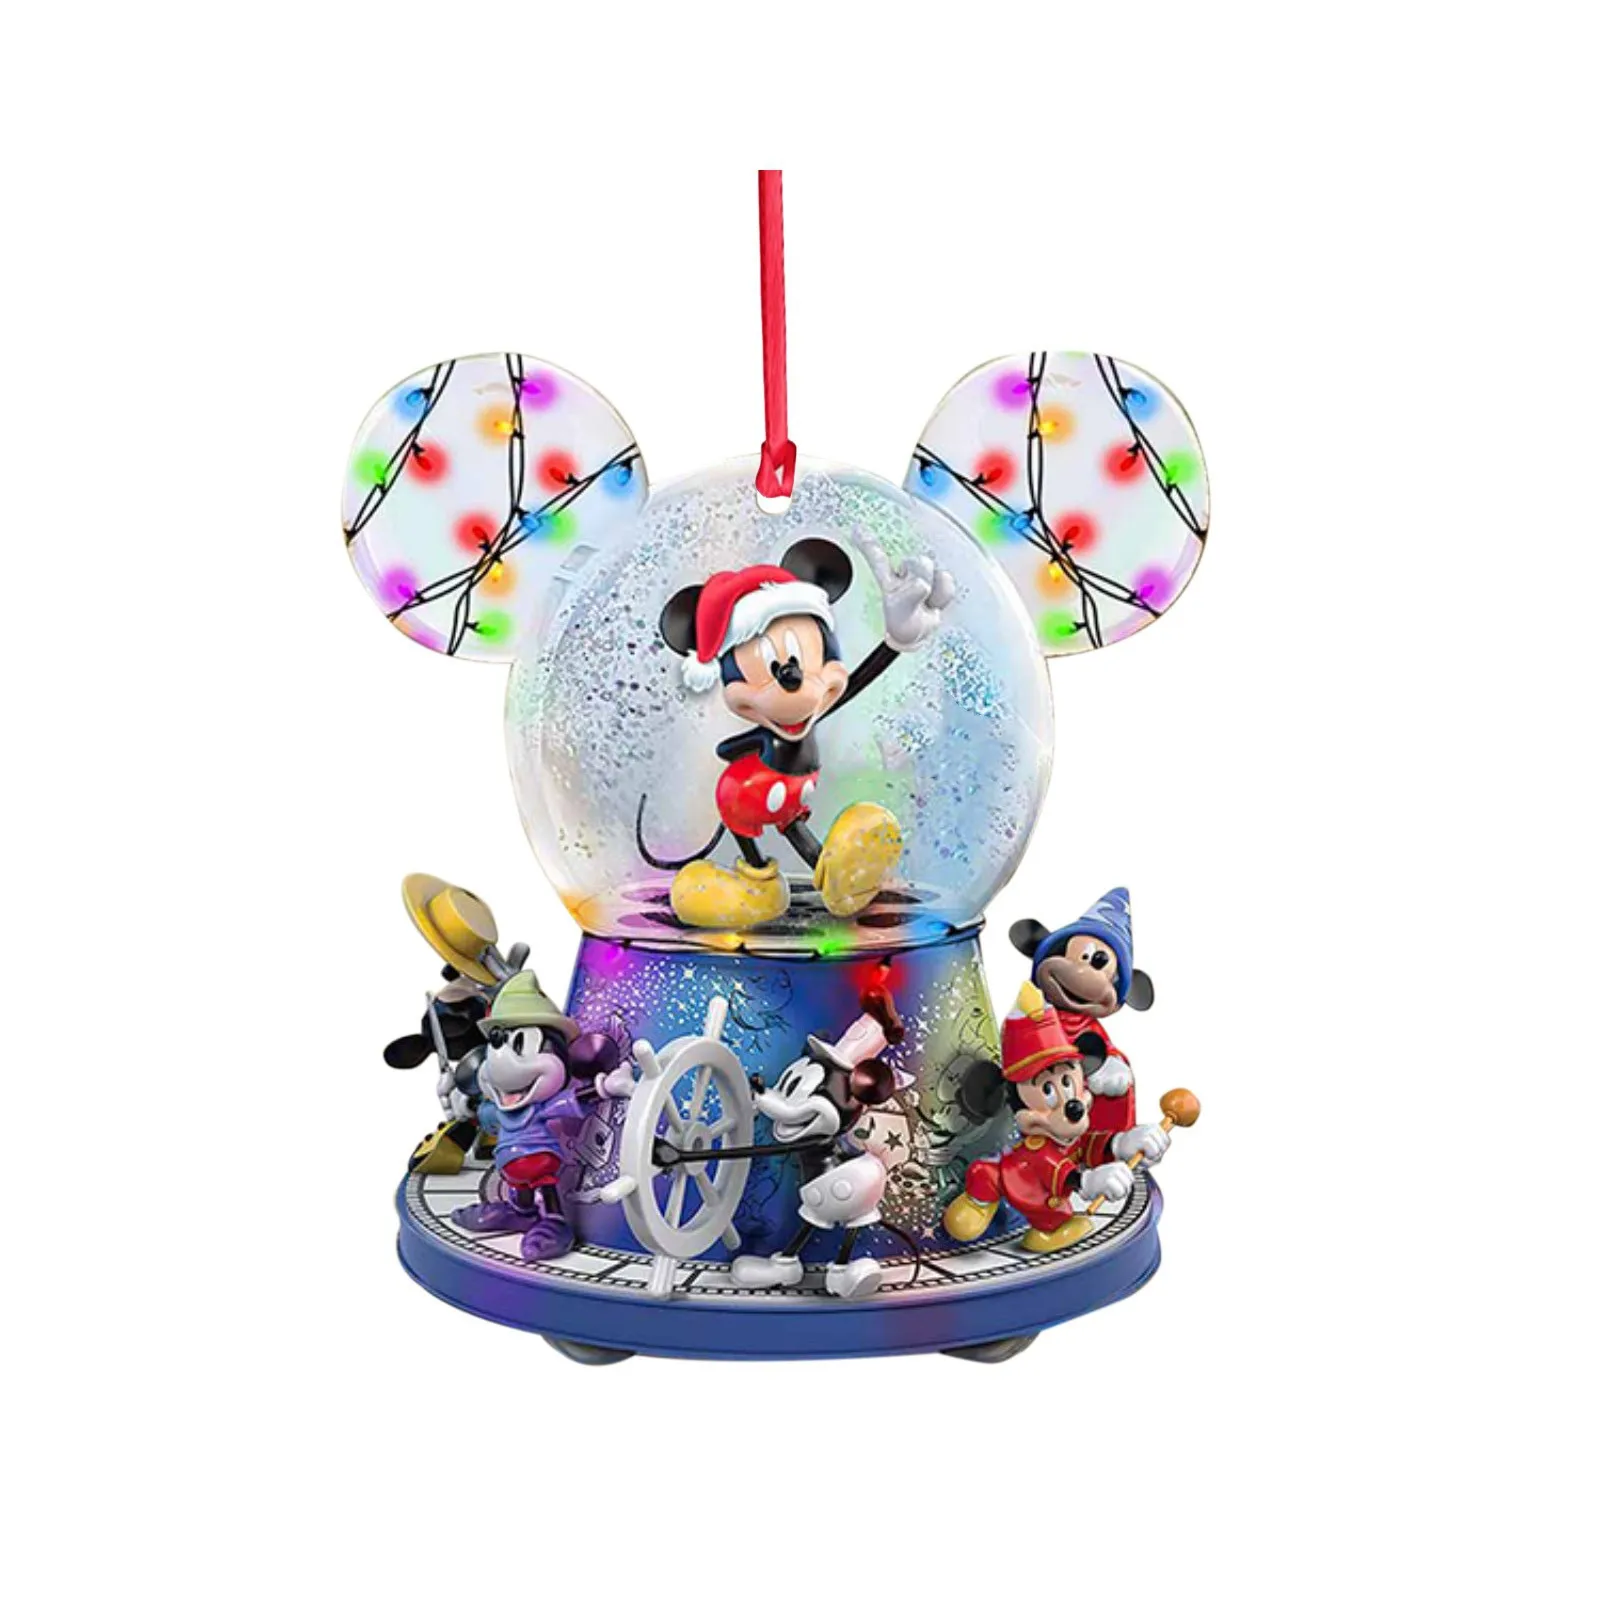 

2D Disney Gure Mickey Minnie Mouse Xmas Tree Decoration Hanging Ornament Home Christmas Party Decor Children Christmas Gift